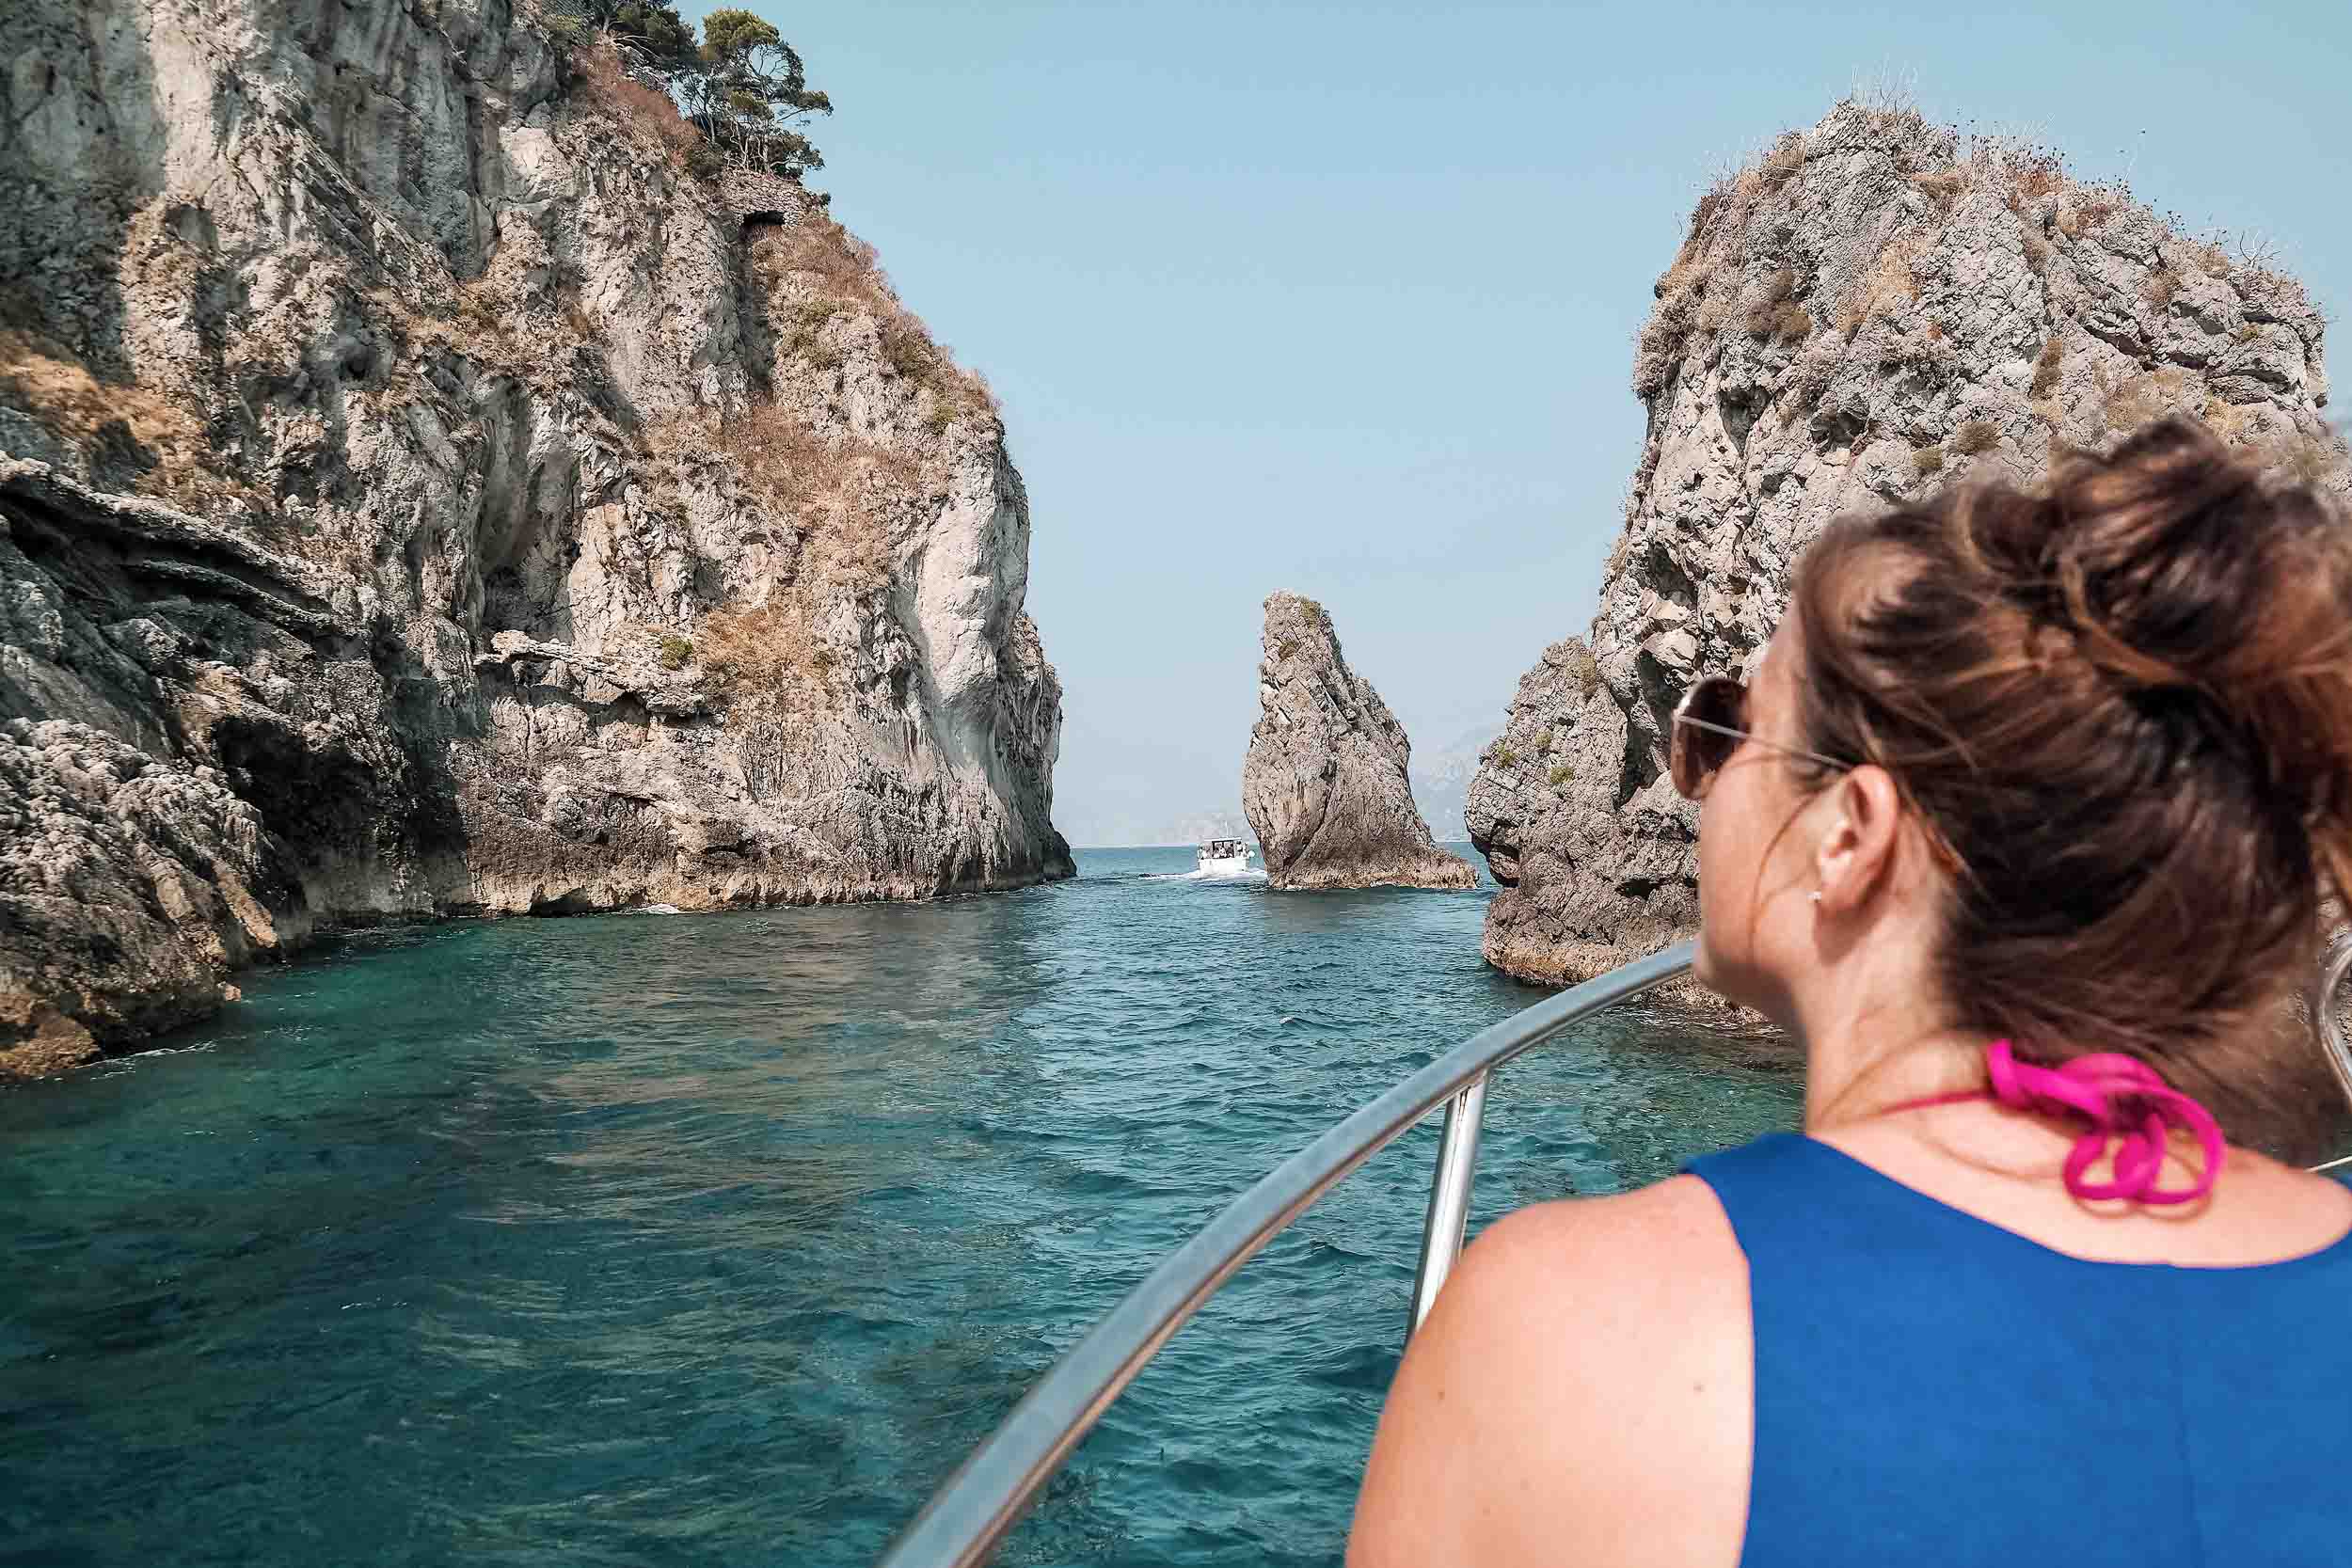 Go on a day trip to Capri when visiting the Amalfi Coast